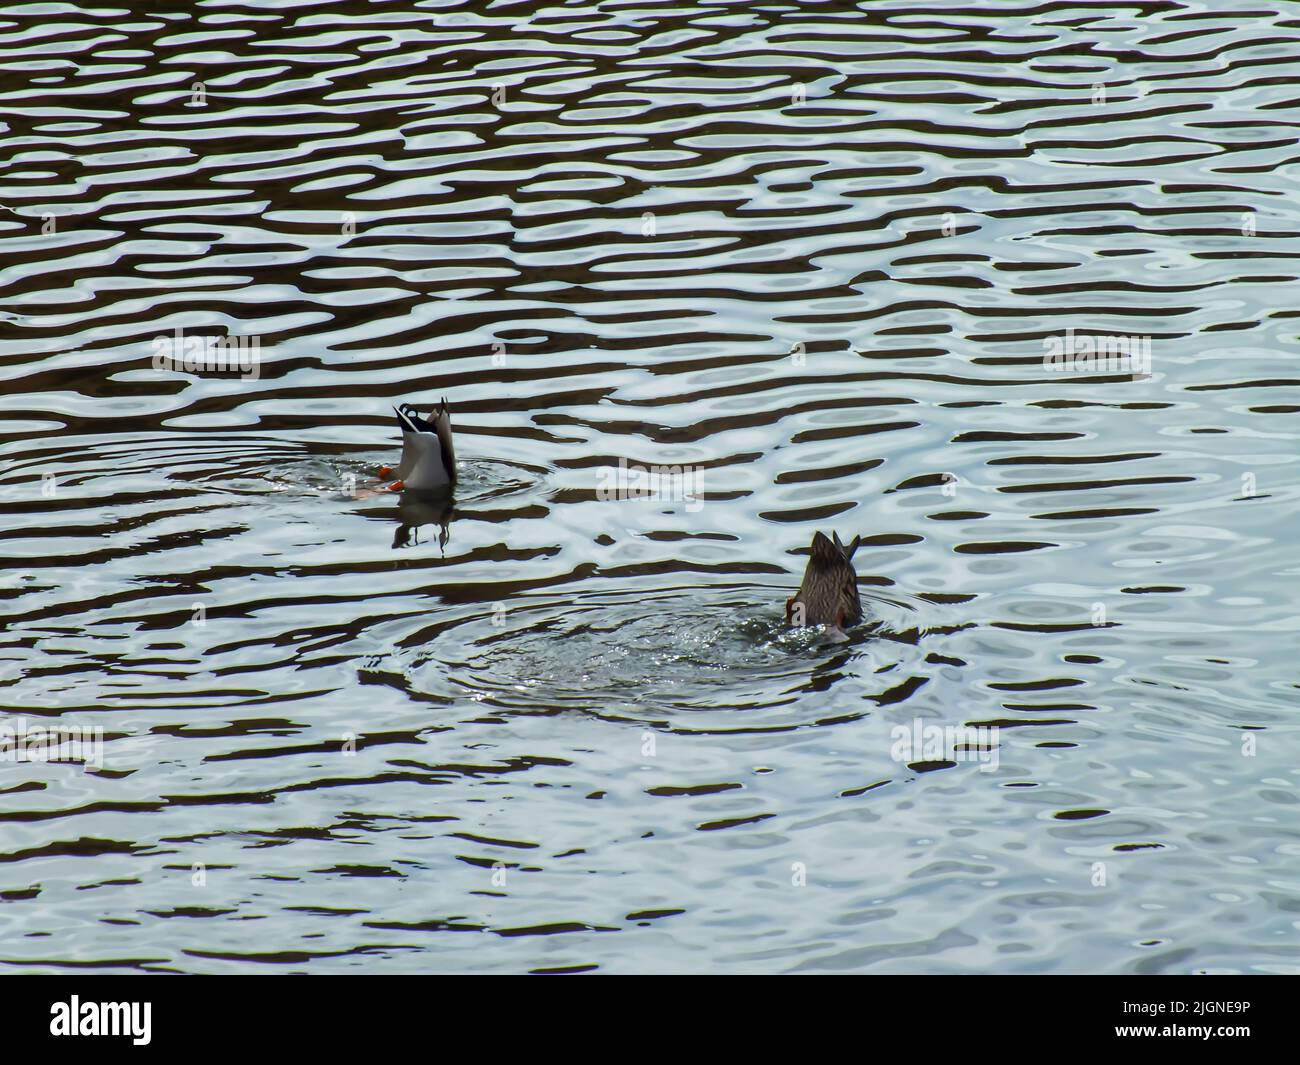 Duck Diving Upside Down and Tail in Air, Legs and tail stick out of the water, Wild ducks swim in a lake, Heads under the water, Wavy water texture Stock Photo